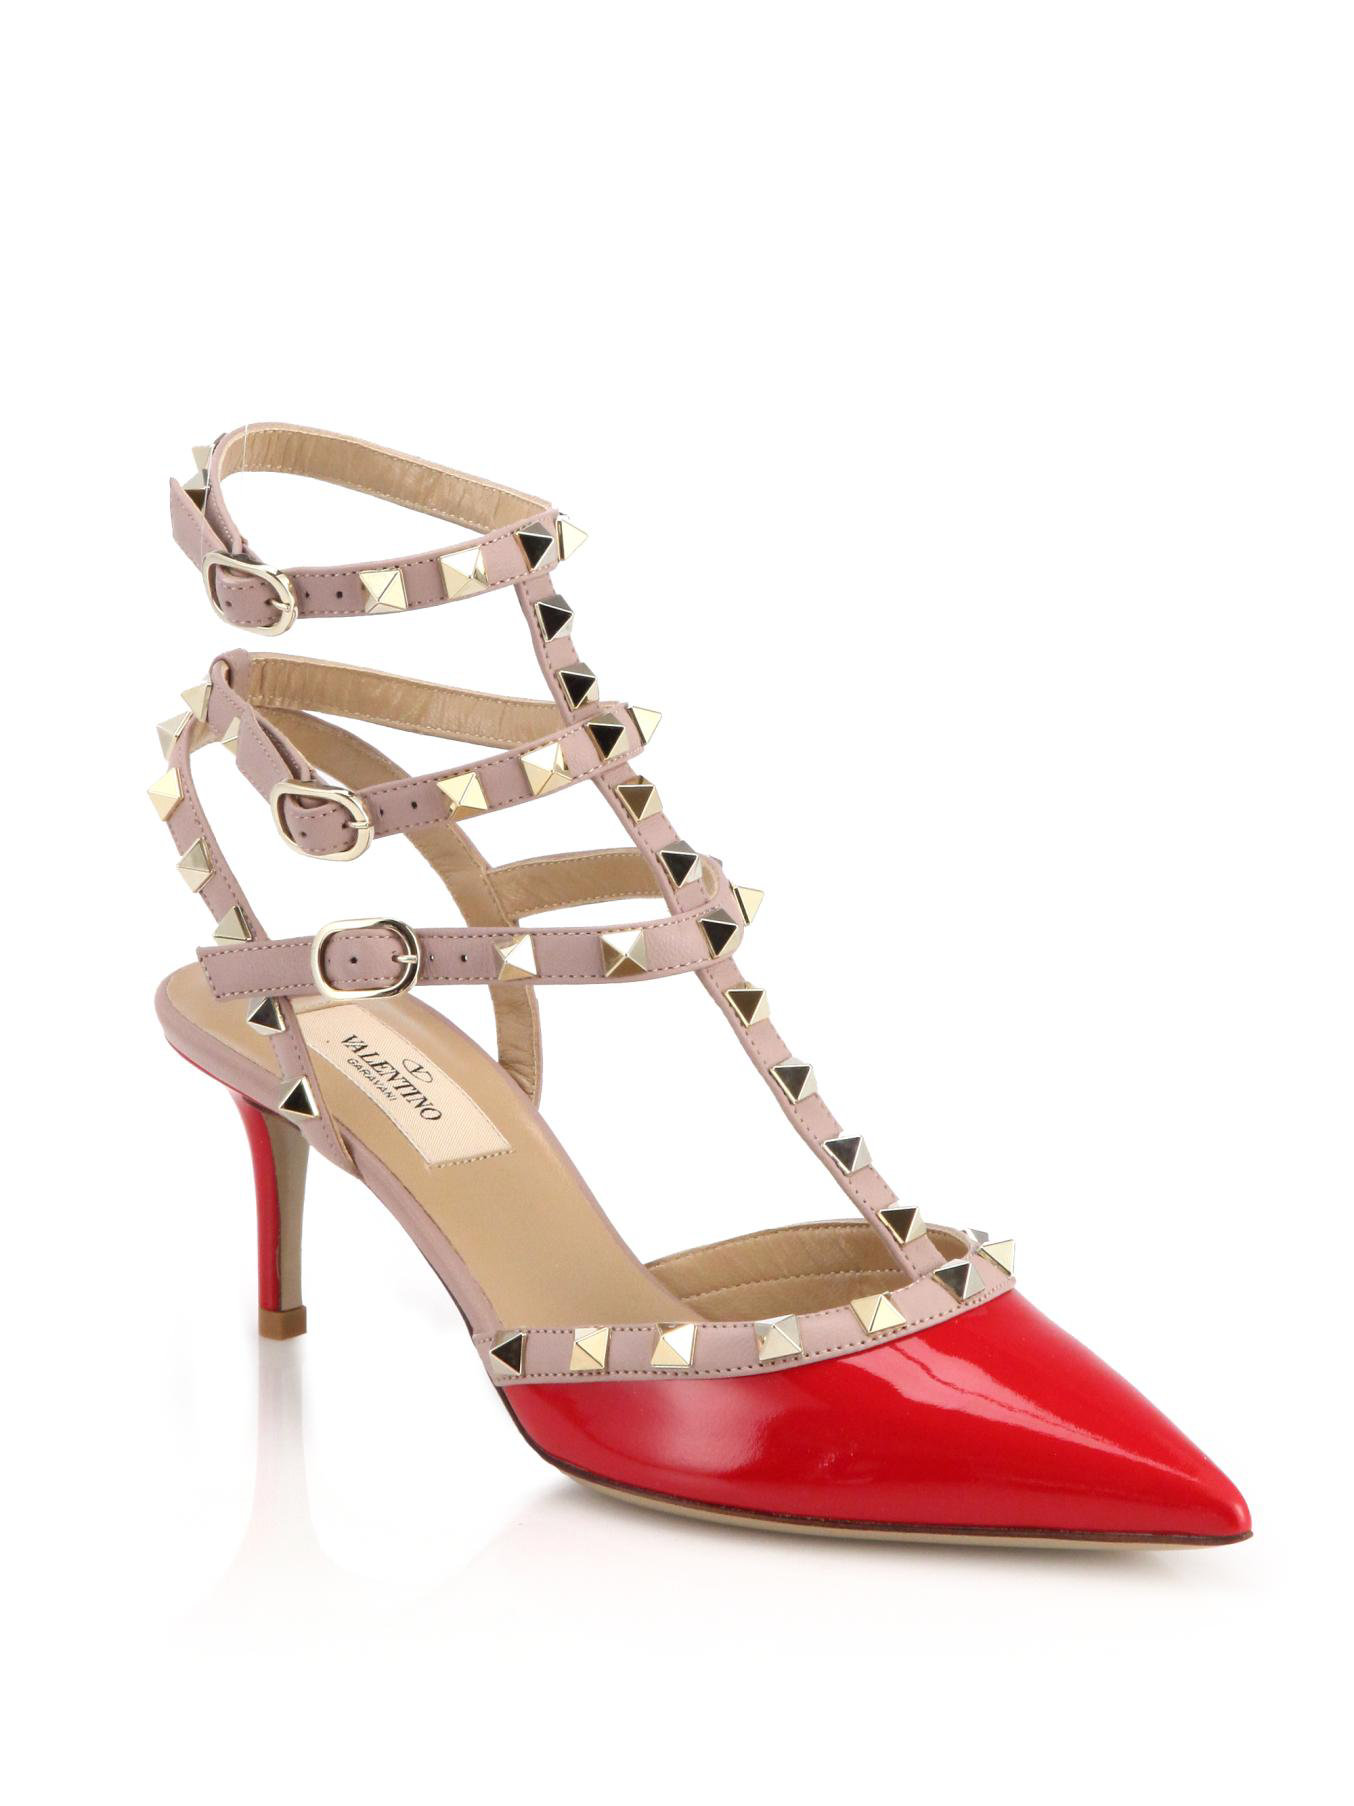 Valentino Patent Leather Rockstud Pumps in Red | Lyst